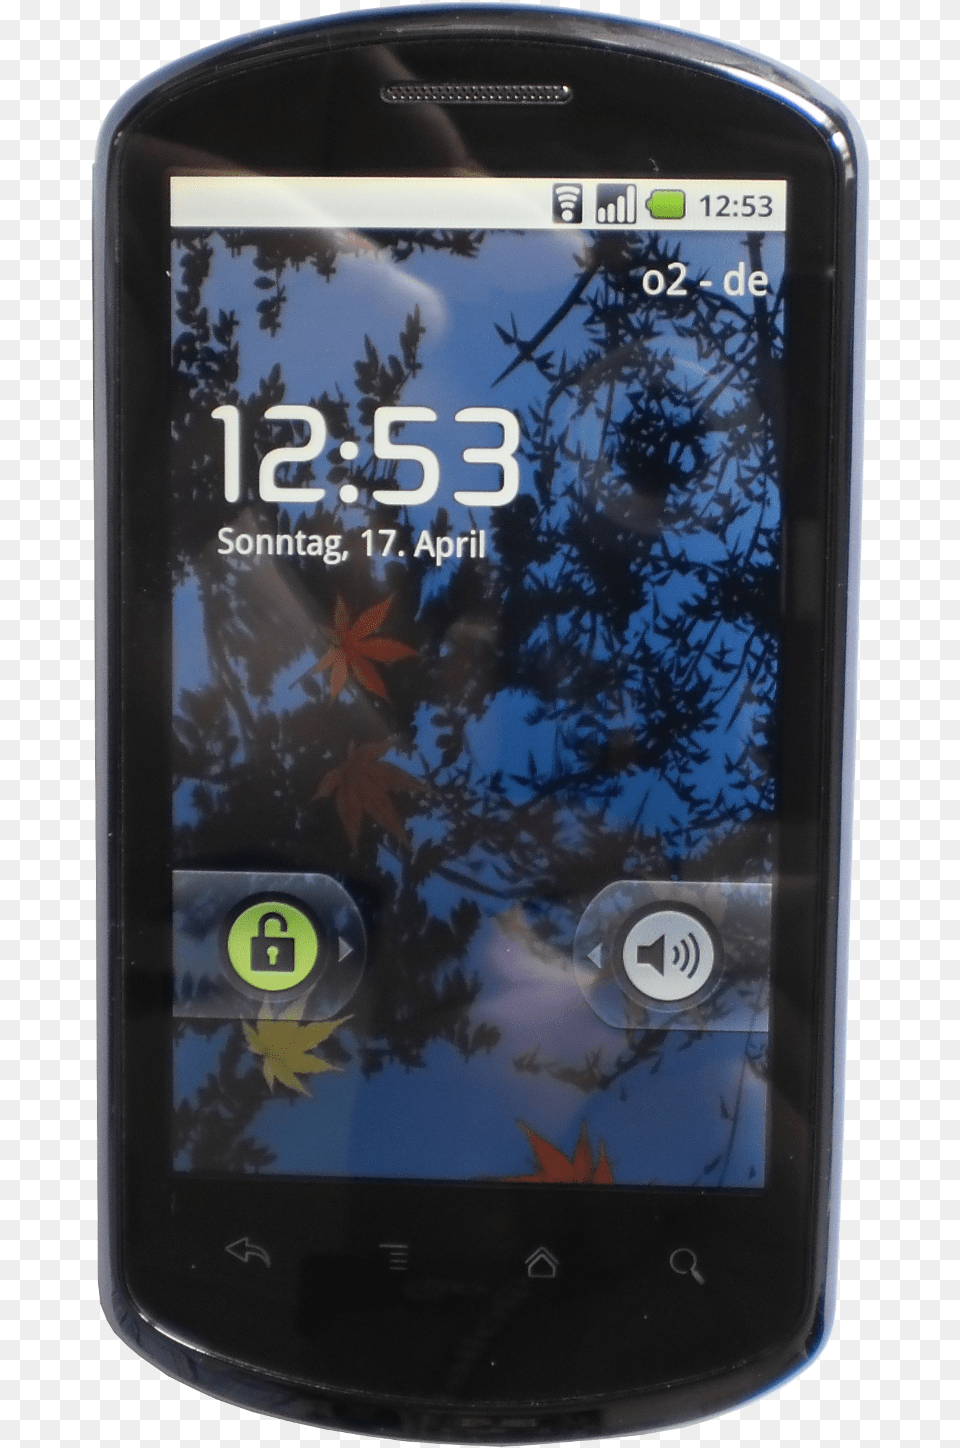 Huawei U8800 Front Android, Electronics, Mobile Phone, Phone Png Image